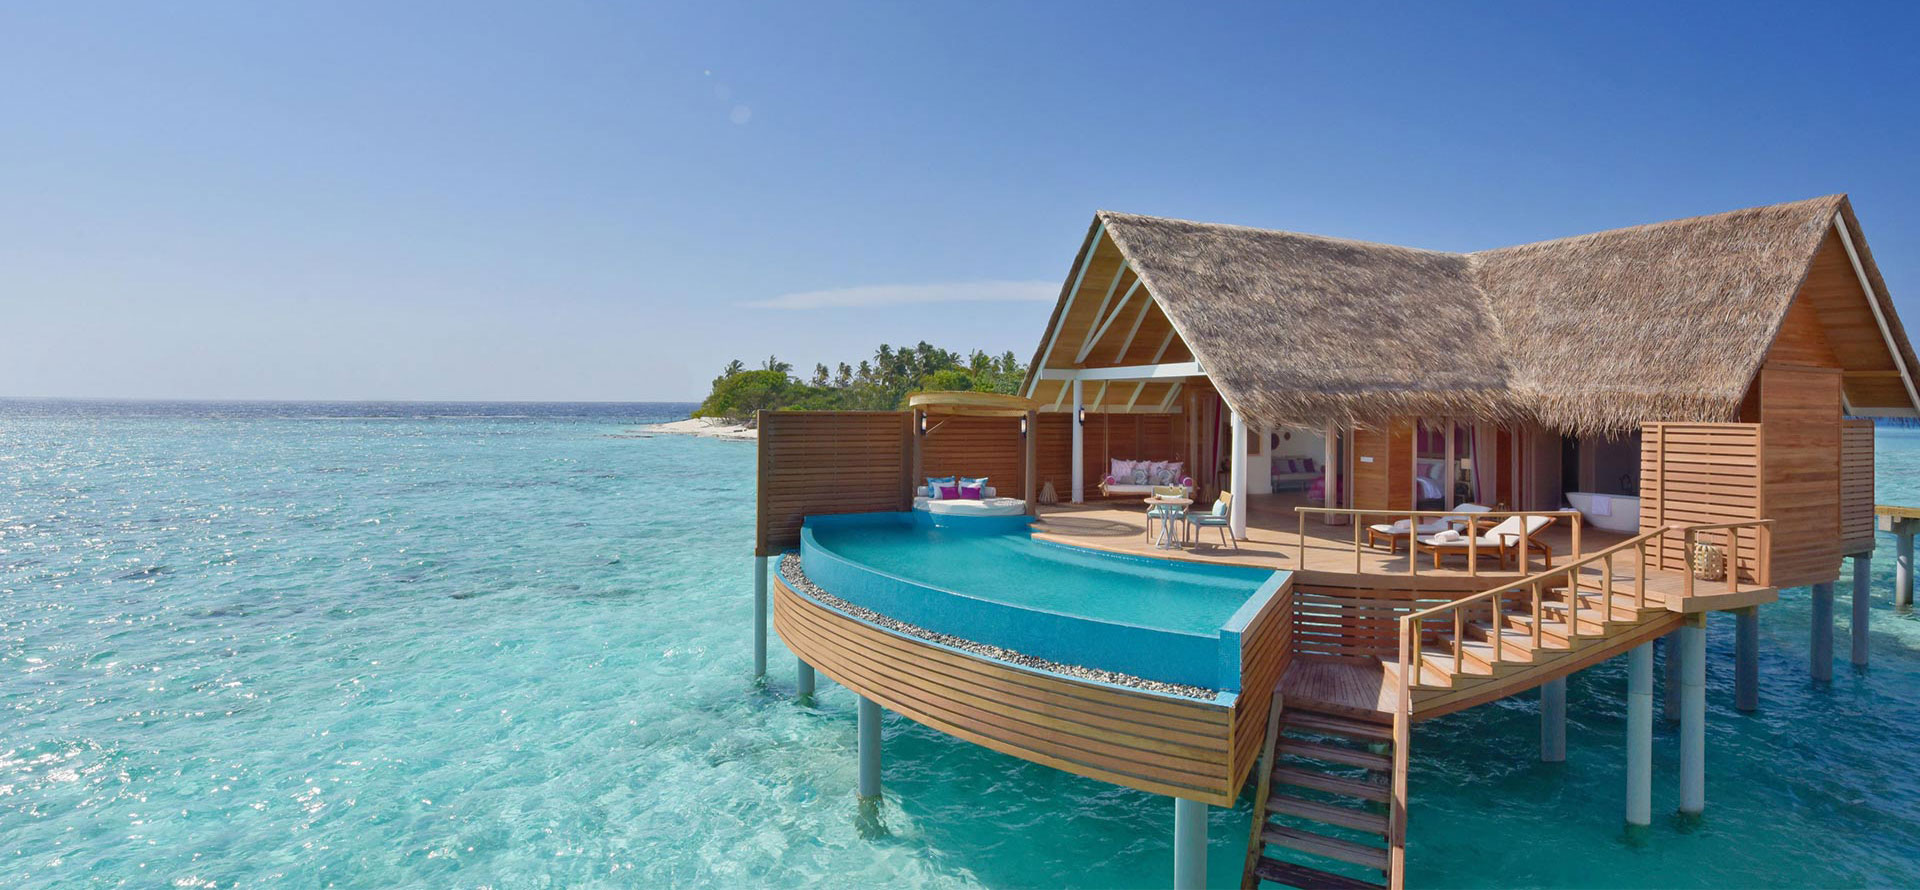 Maldives All-Inclusive Family Resorts and bungalows.